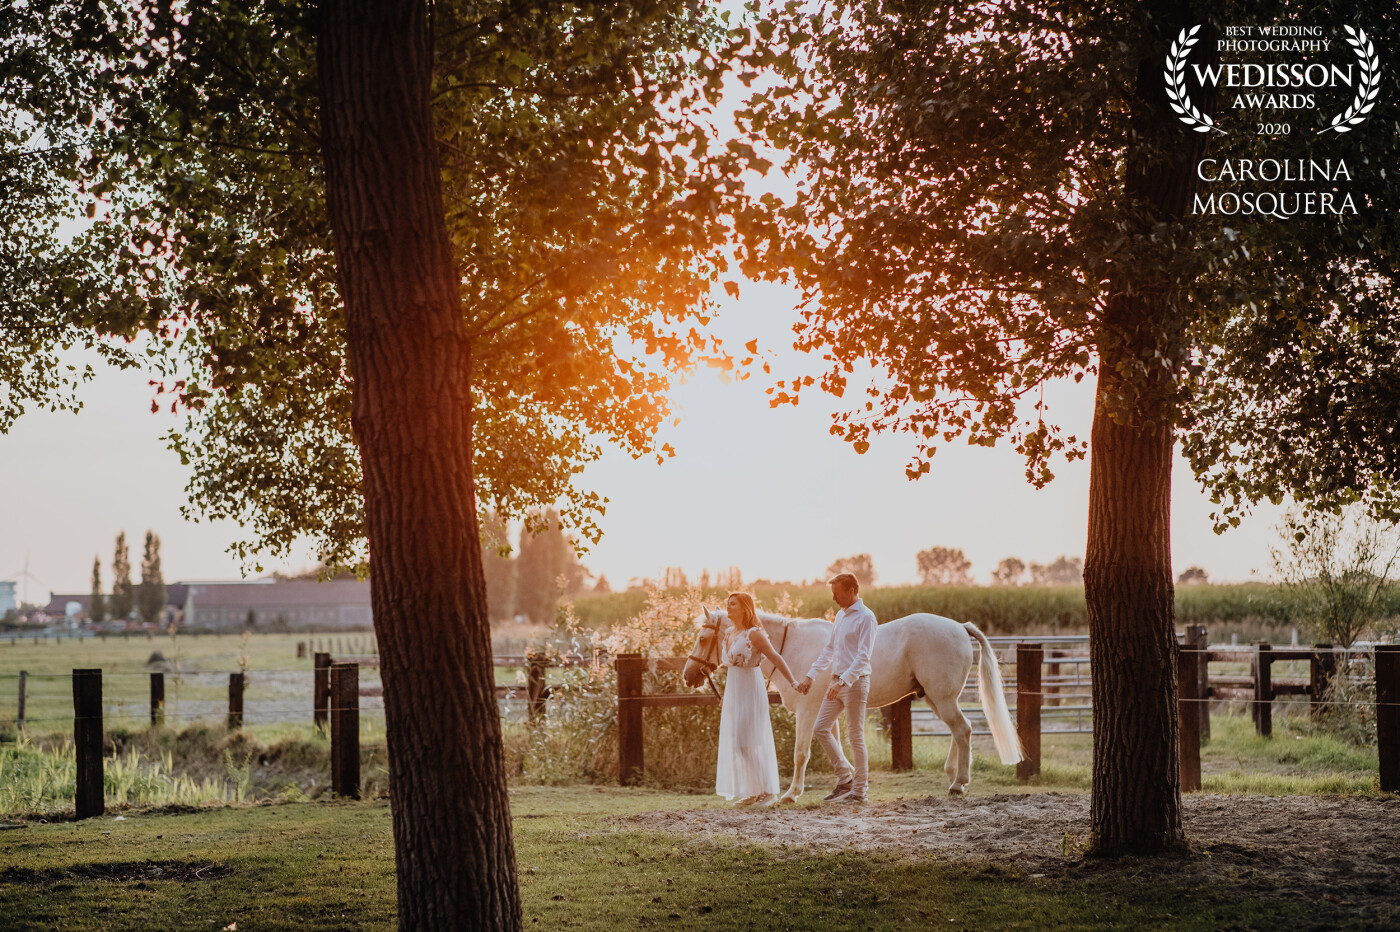 A beautiful golden hour engagement shoot in Belgium between the horses... The wedding will we celebrate in France next year! We are looking forward to it!!!